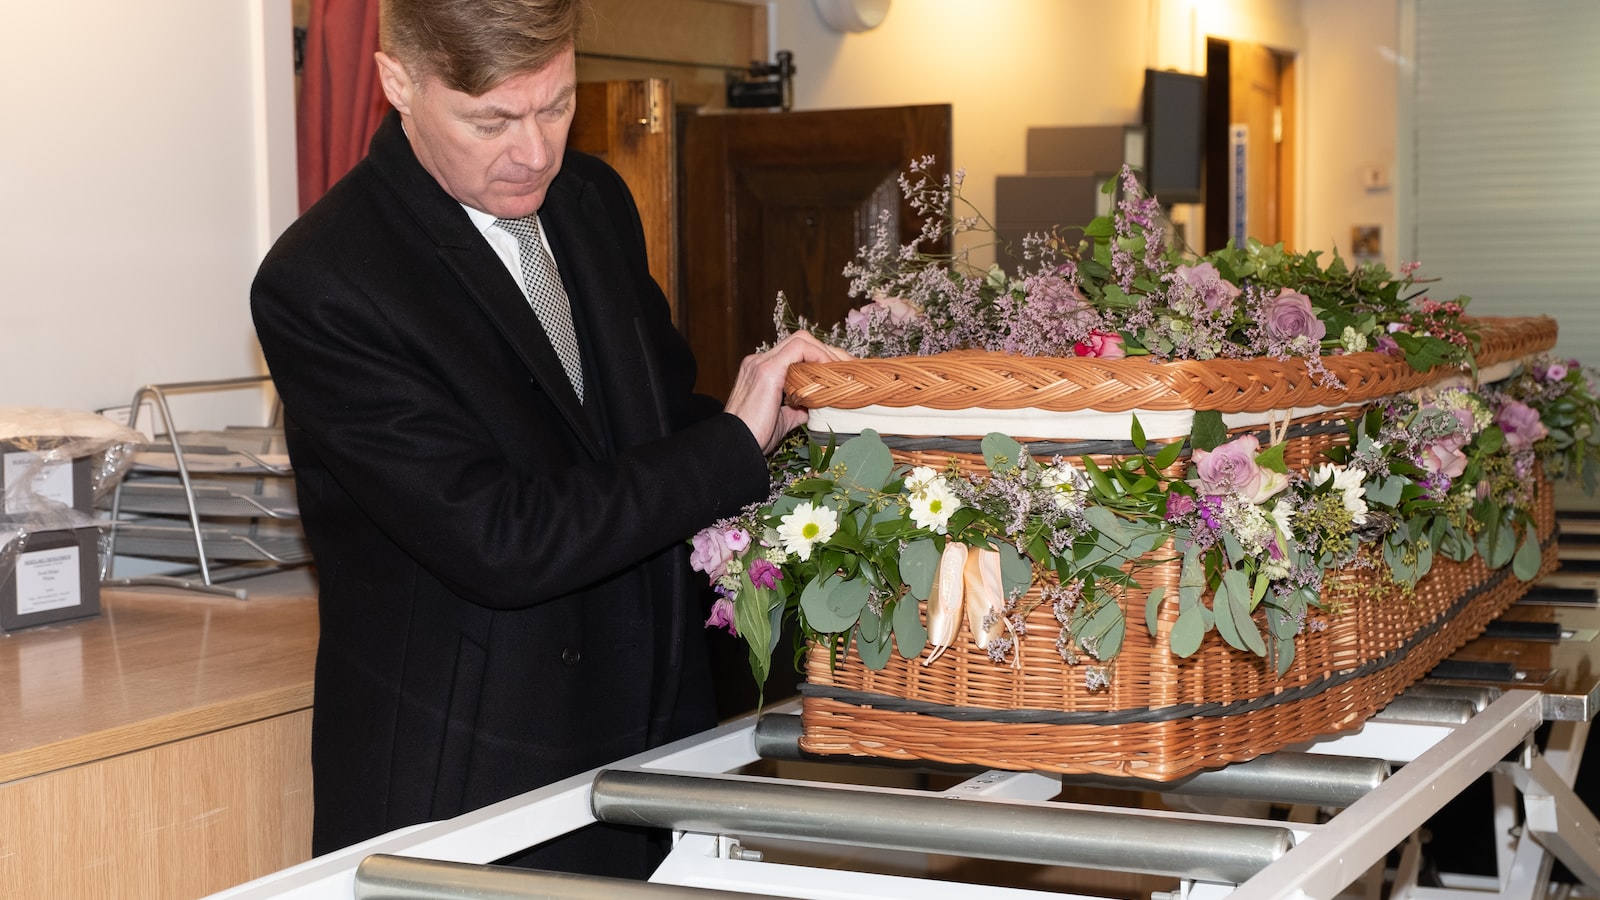 What To Wear To Funeral Visitation